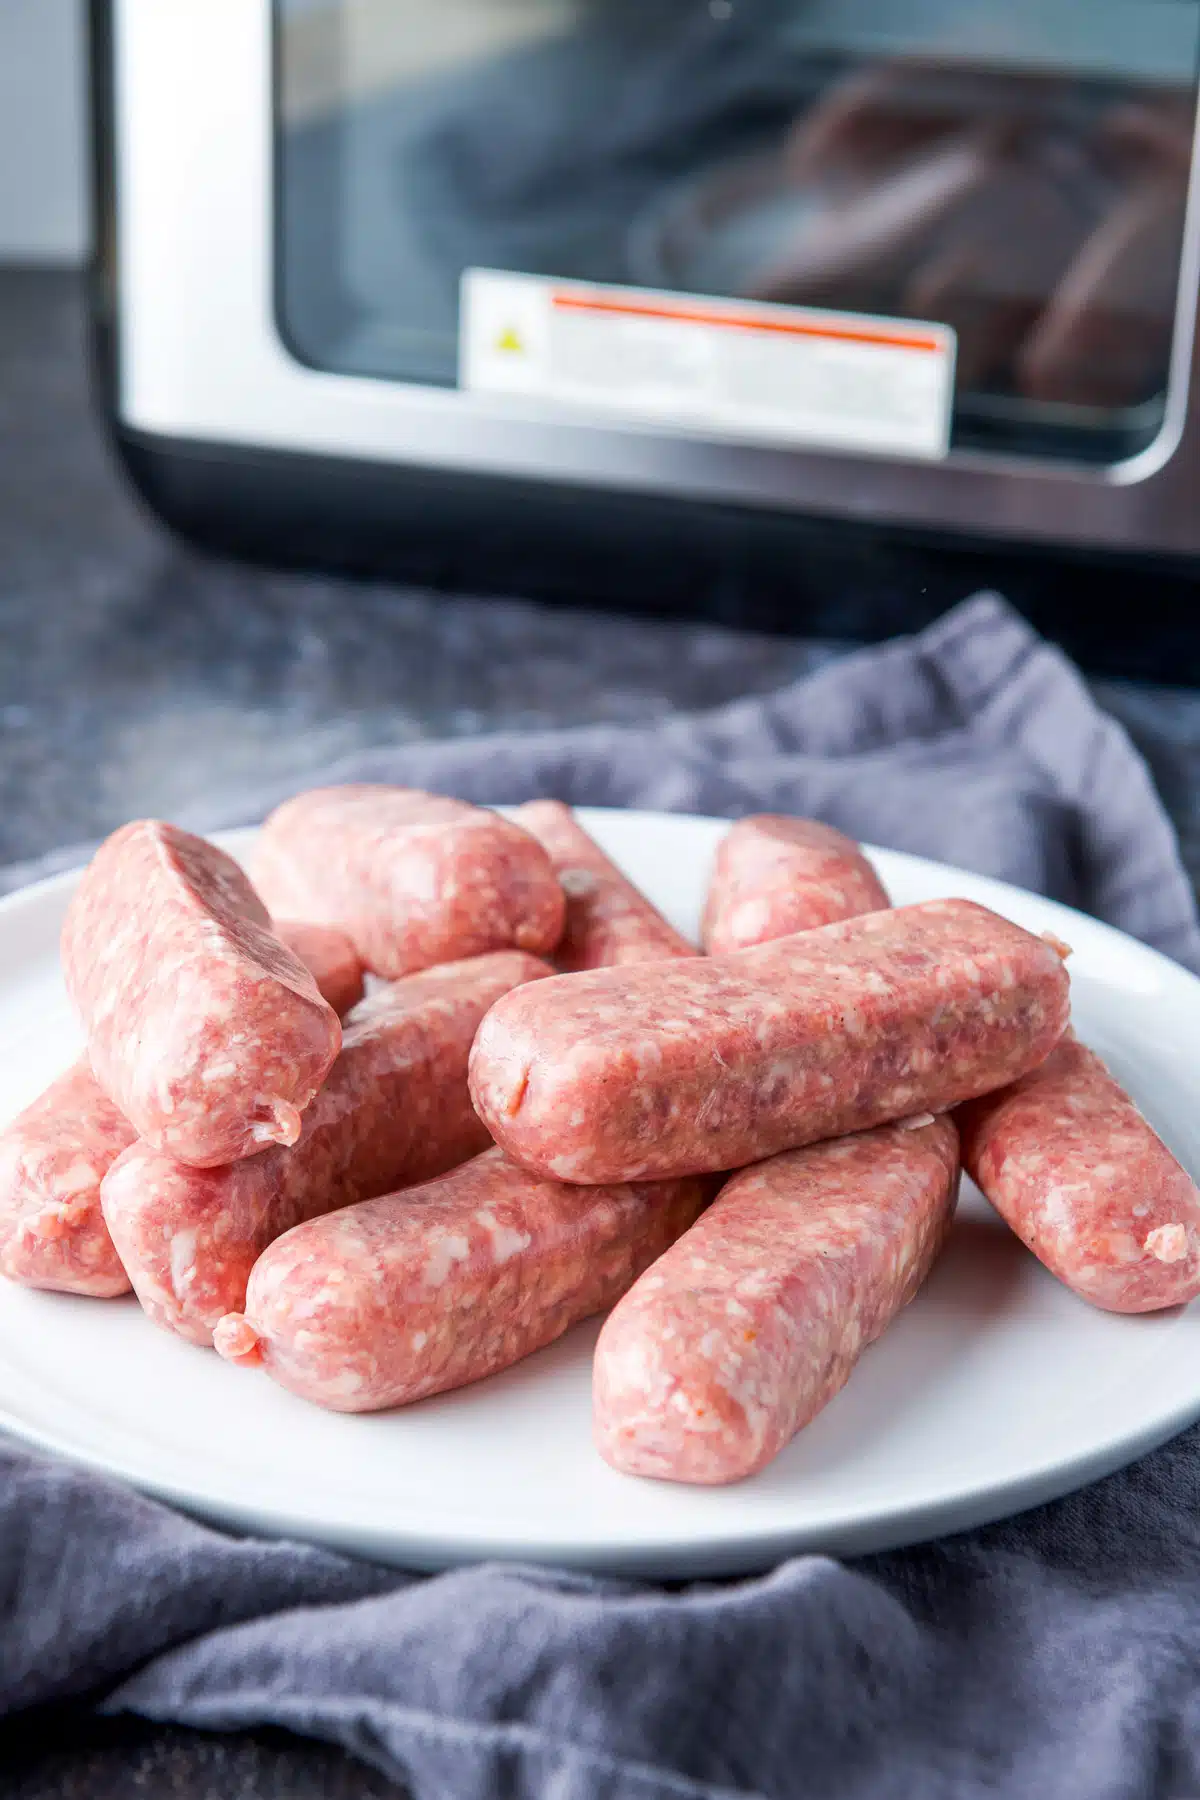 Raw sausages on a plate in front of an air fryer